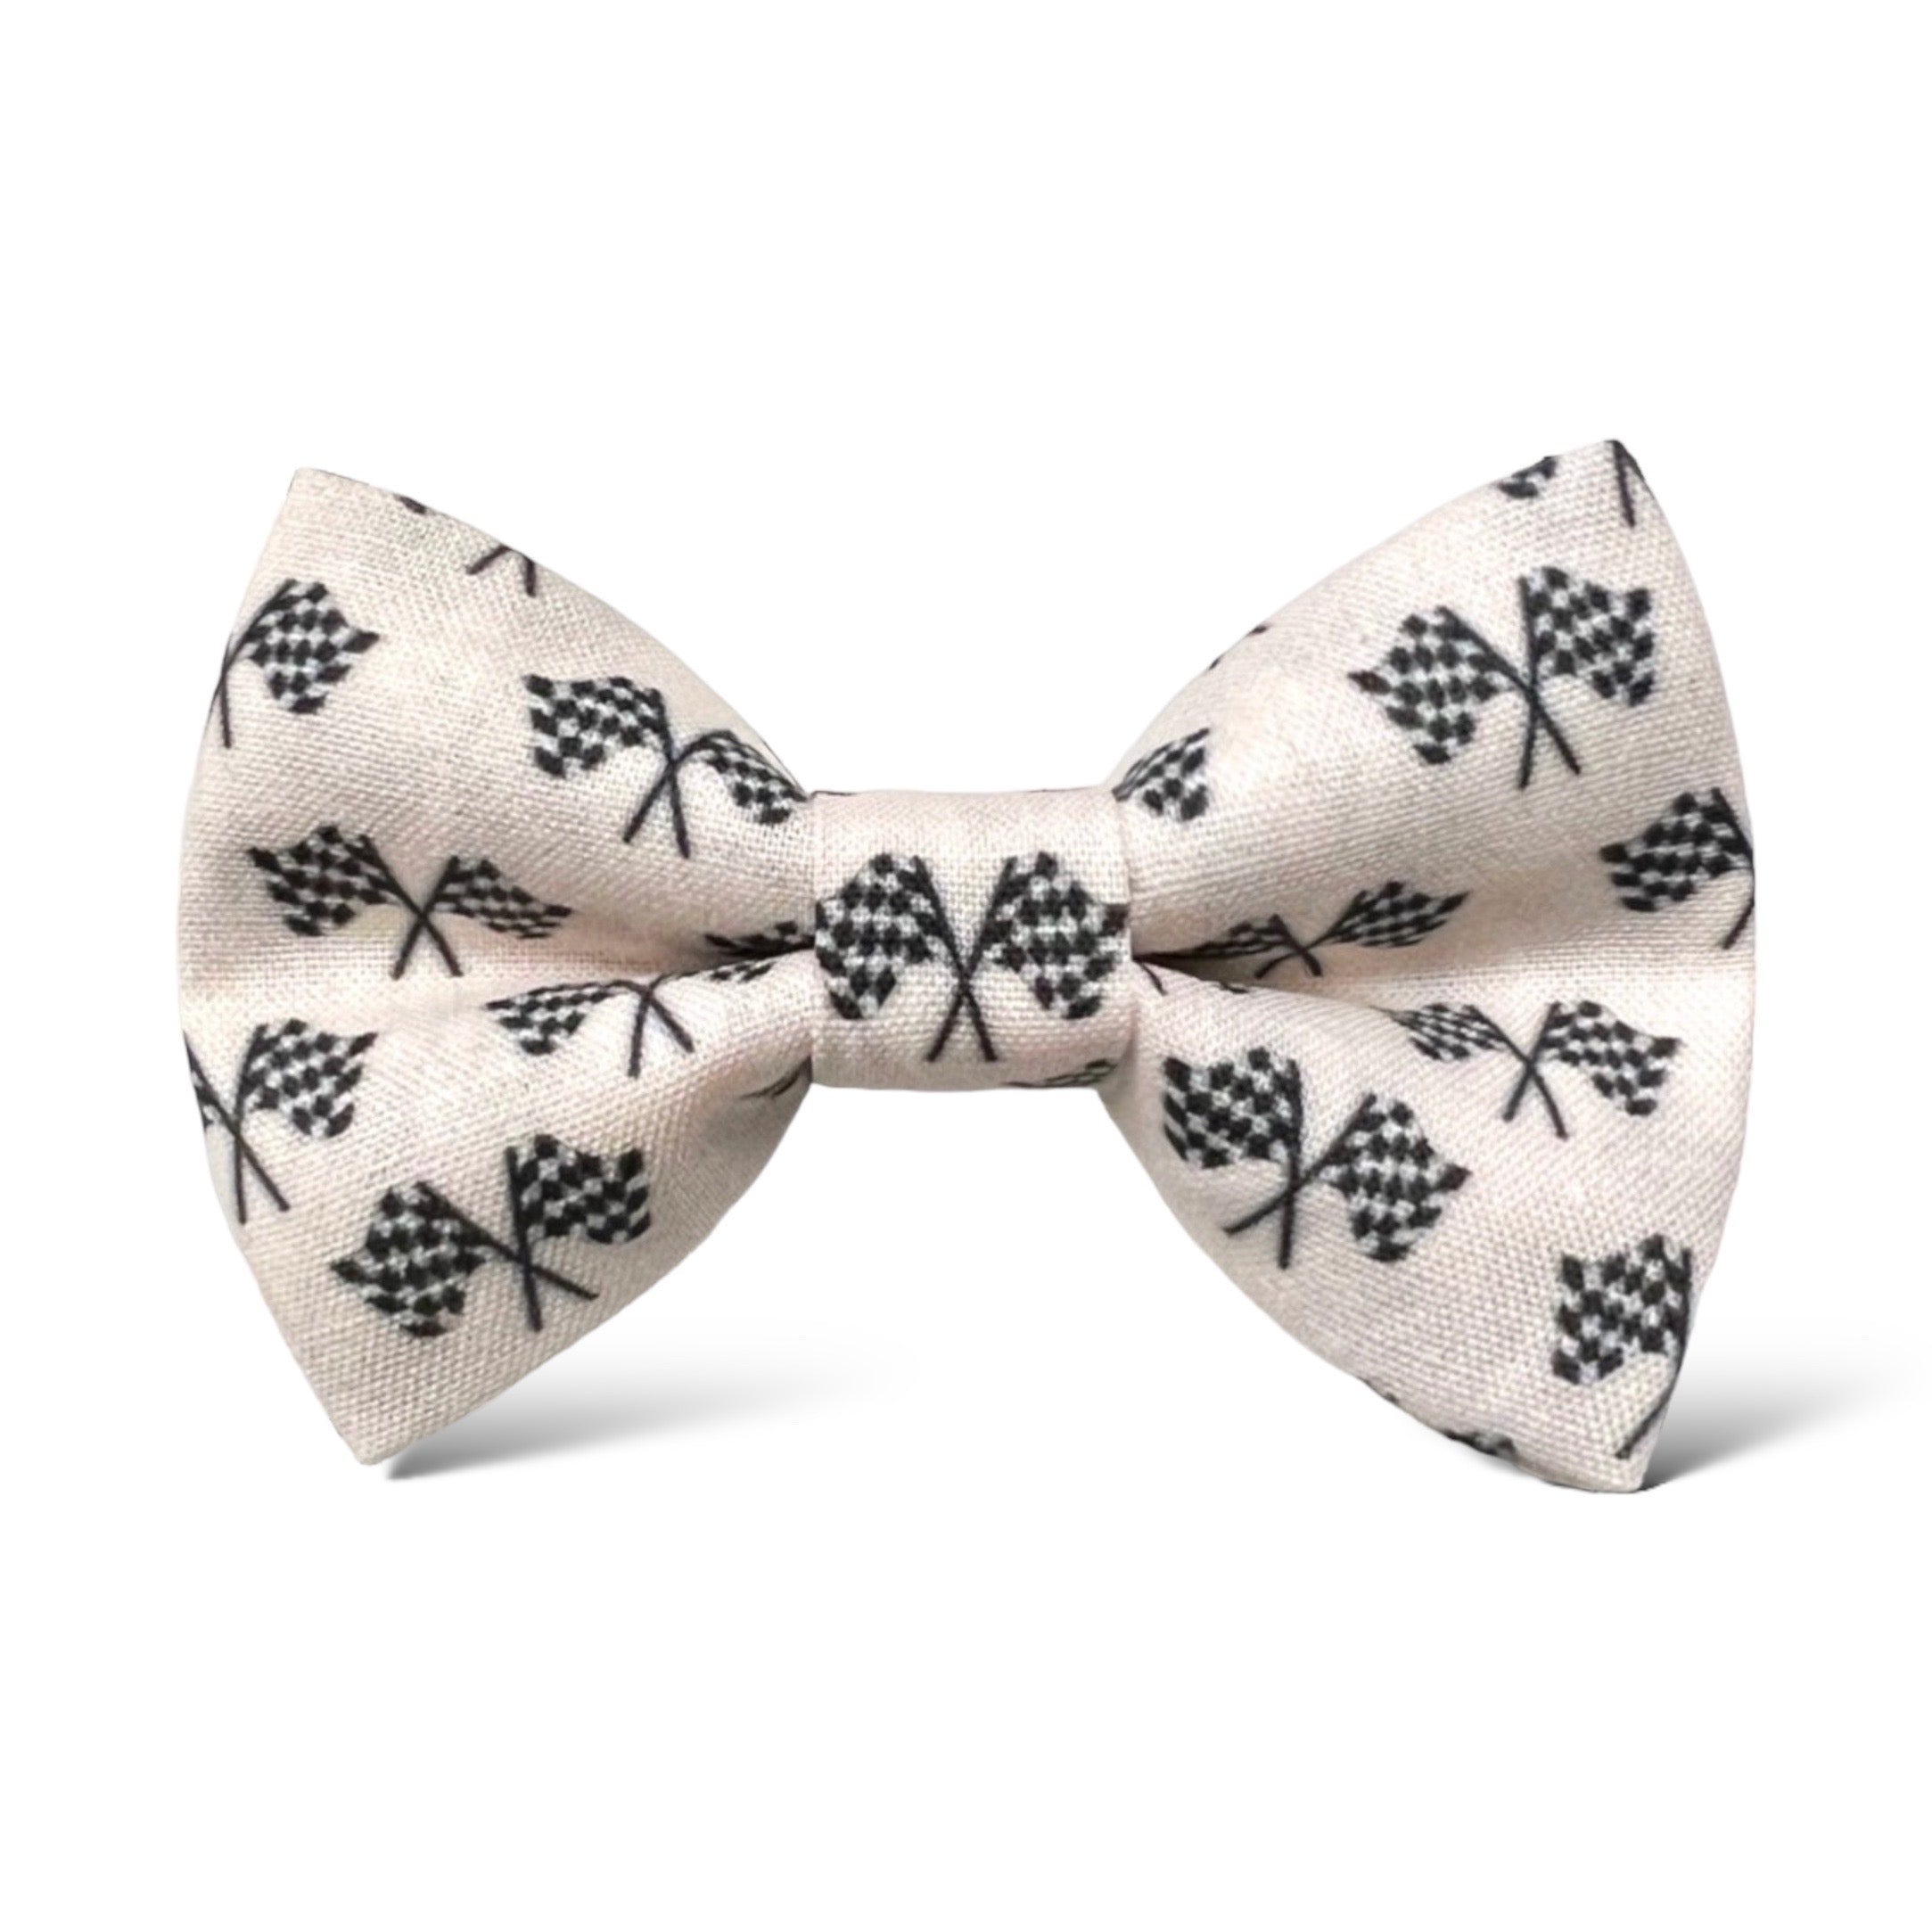 Race Day Flag Bow Tie